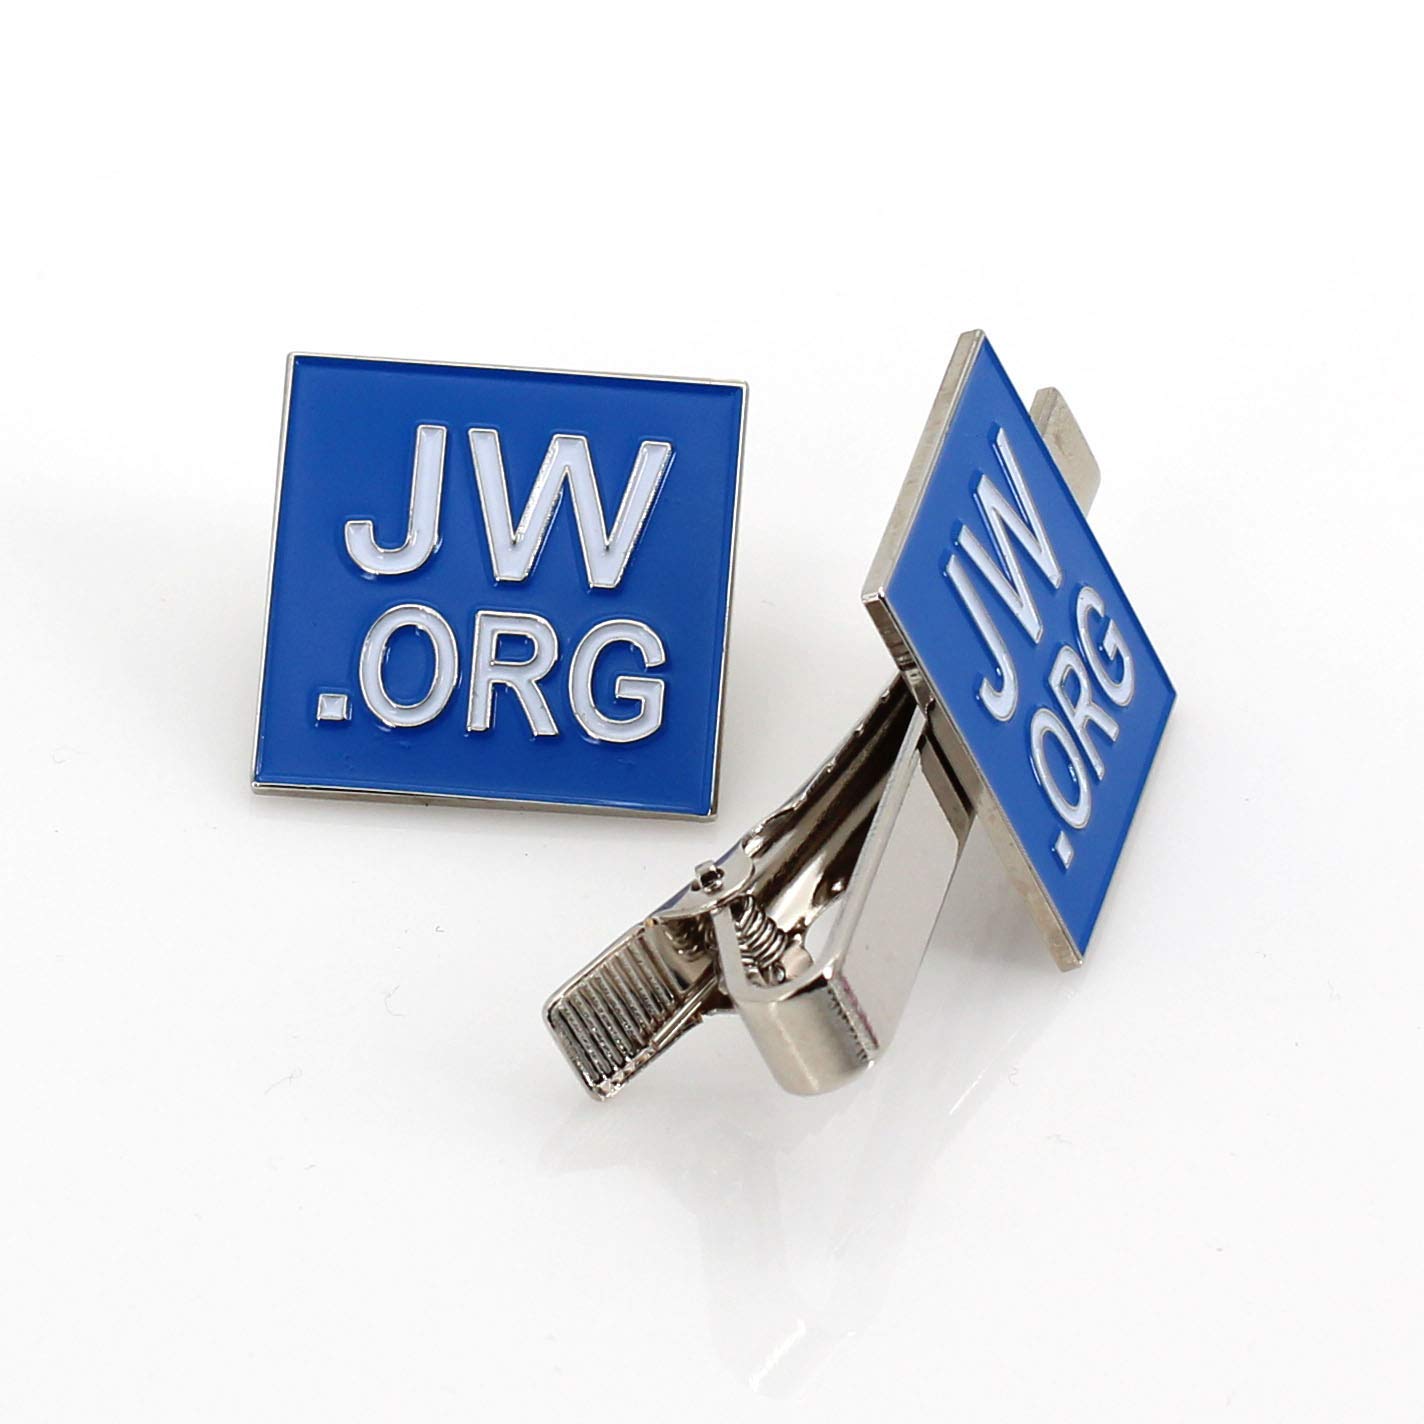 JW Logo - Perfect Present-Jw.org Gift Necktie Clip and Lapel Pin Set-Square -with  JW.ORG Logo Gift Box-Blue